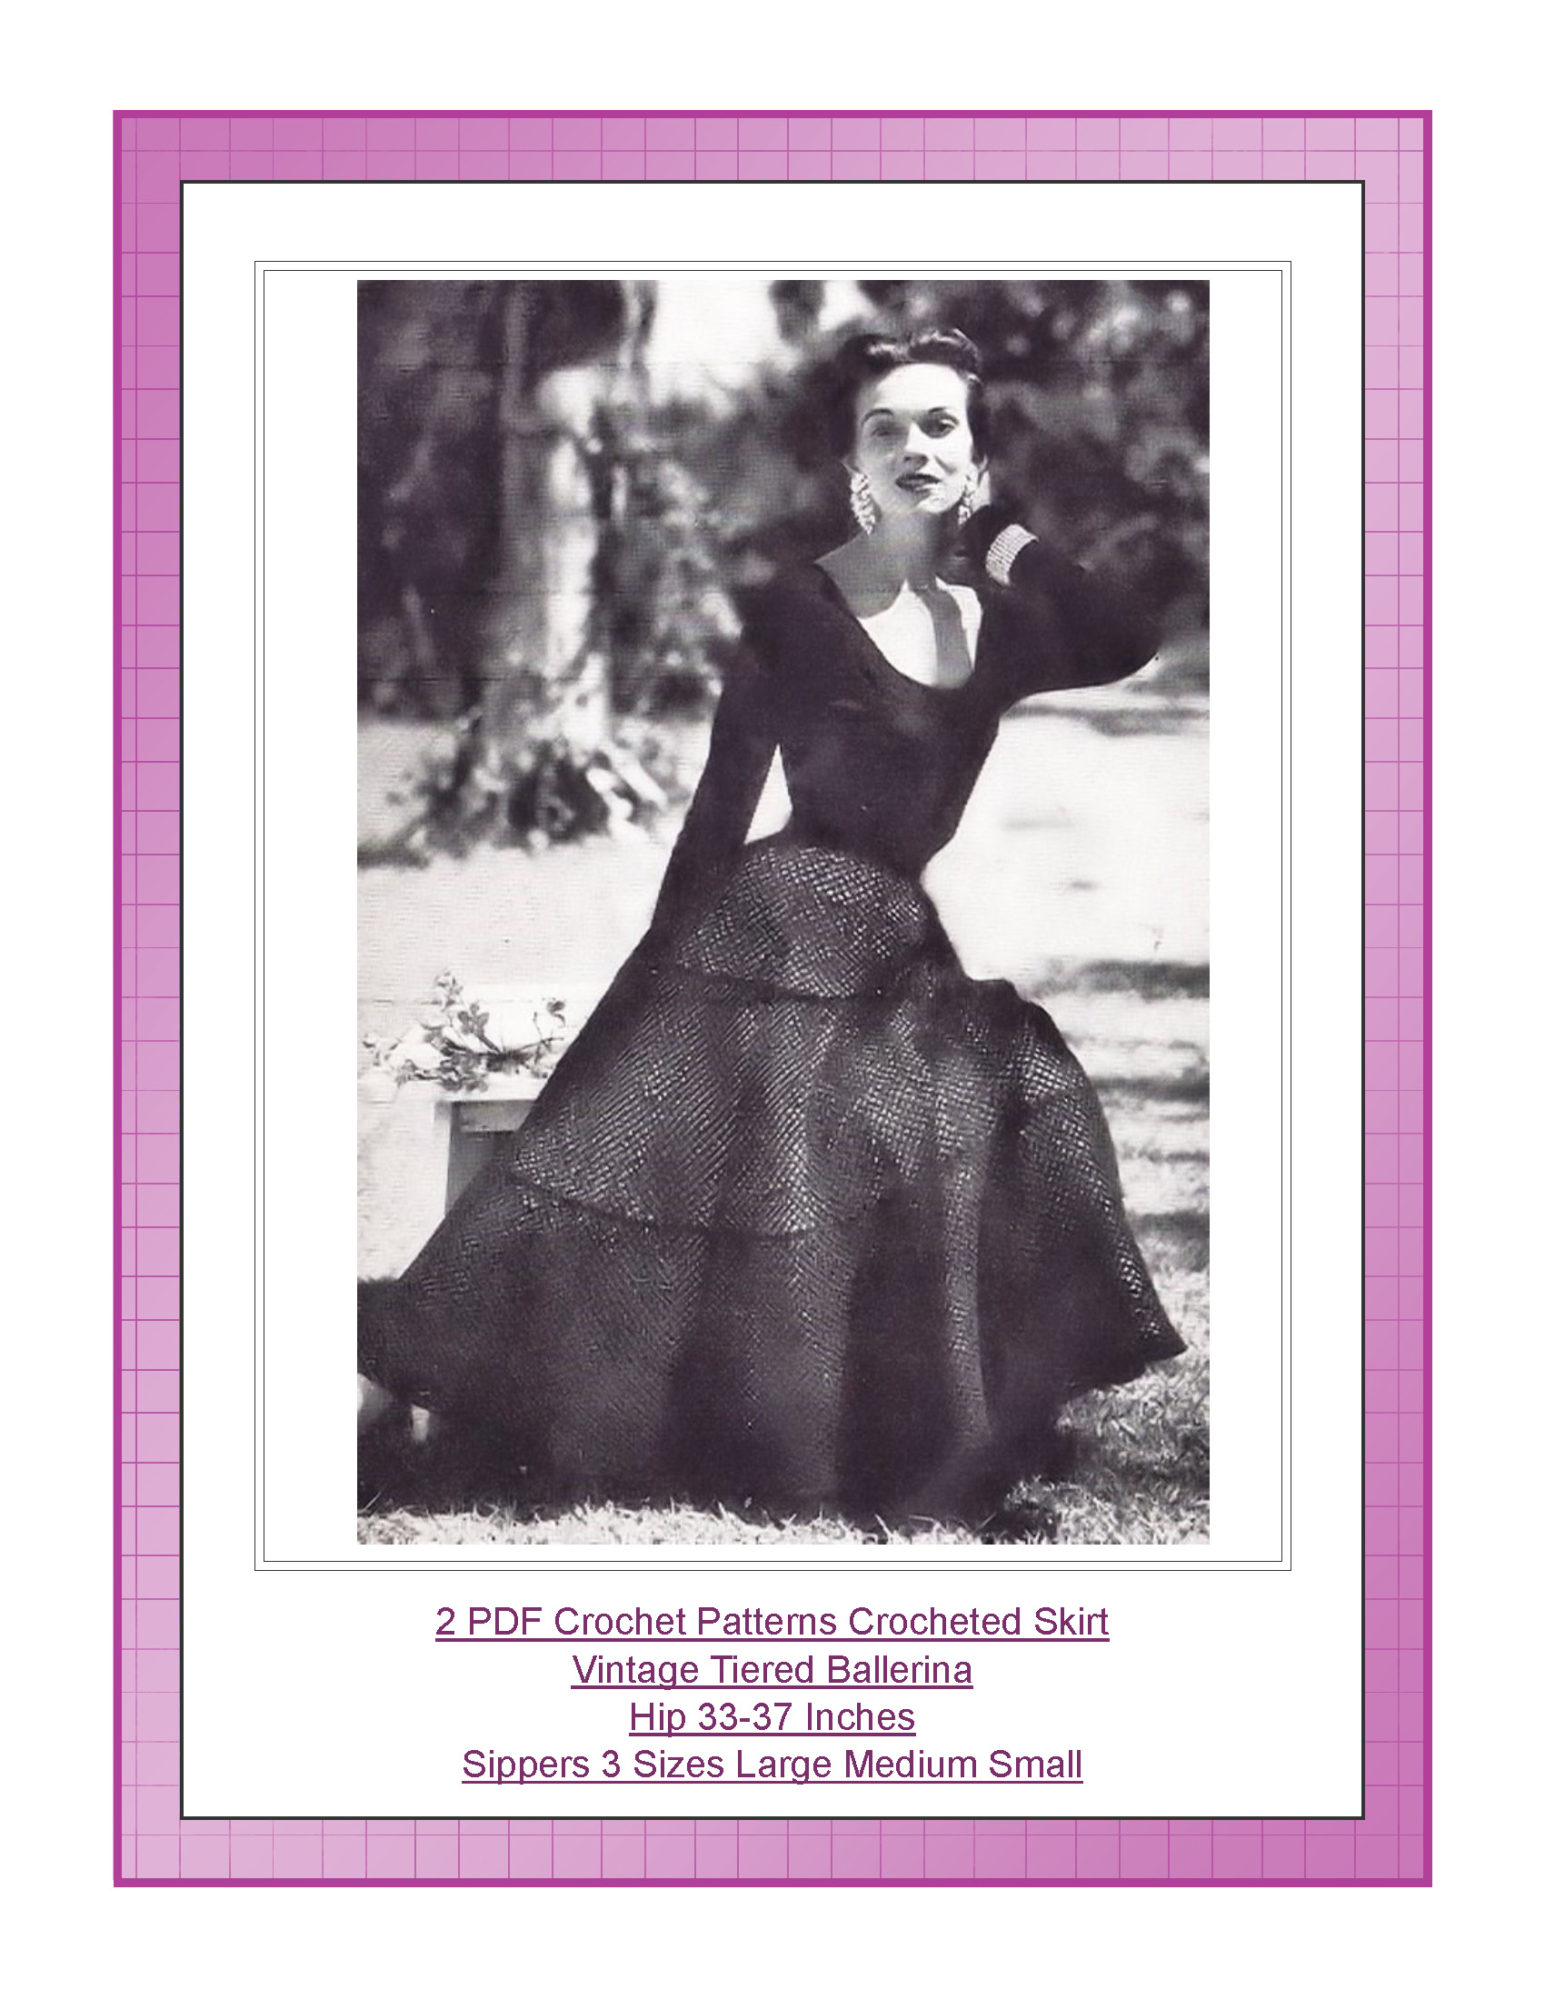 2 PDF Crochet Patterns Crocheted Skirt Vintage Tiered Ballerina Hip 33-37 Inches Sippers 3 Sizes Large Medium Small